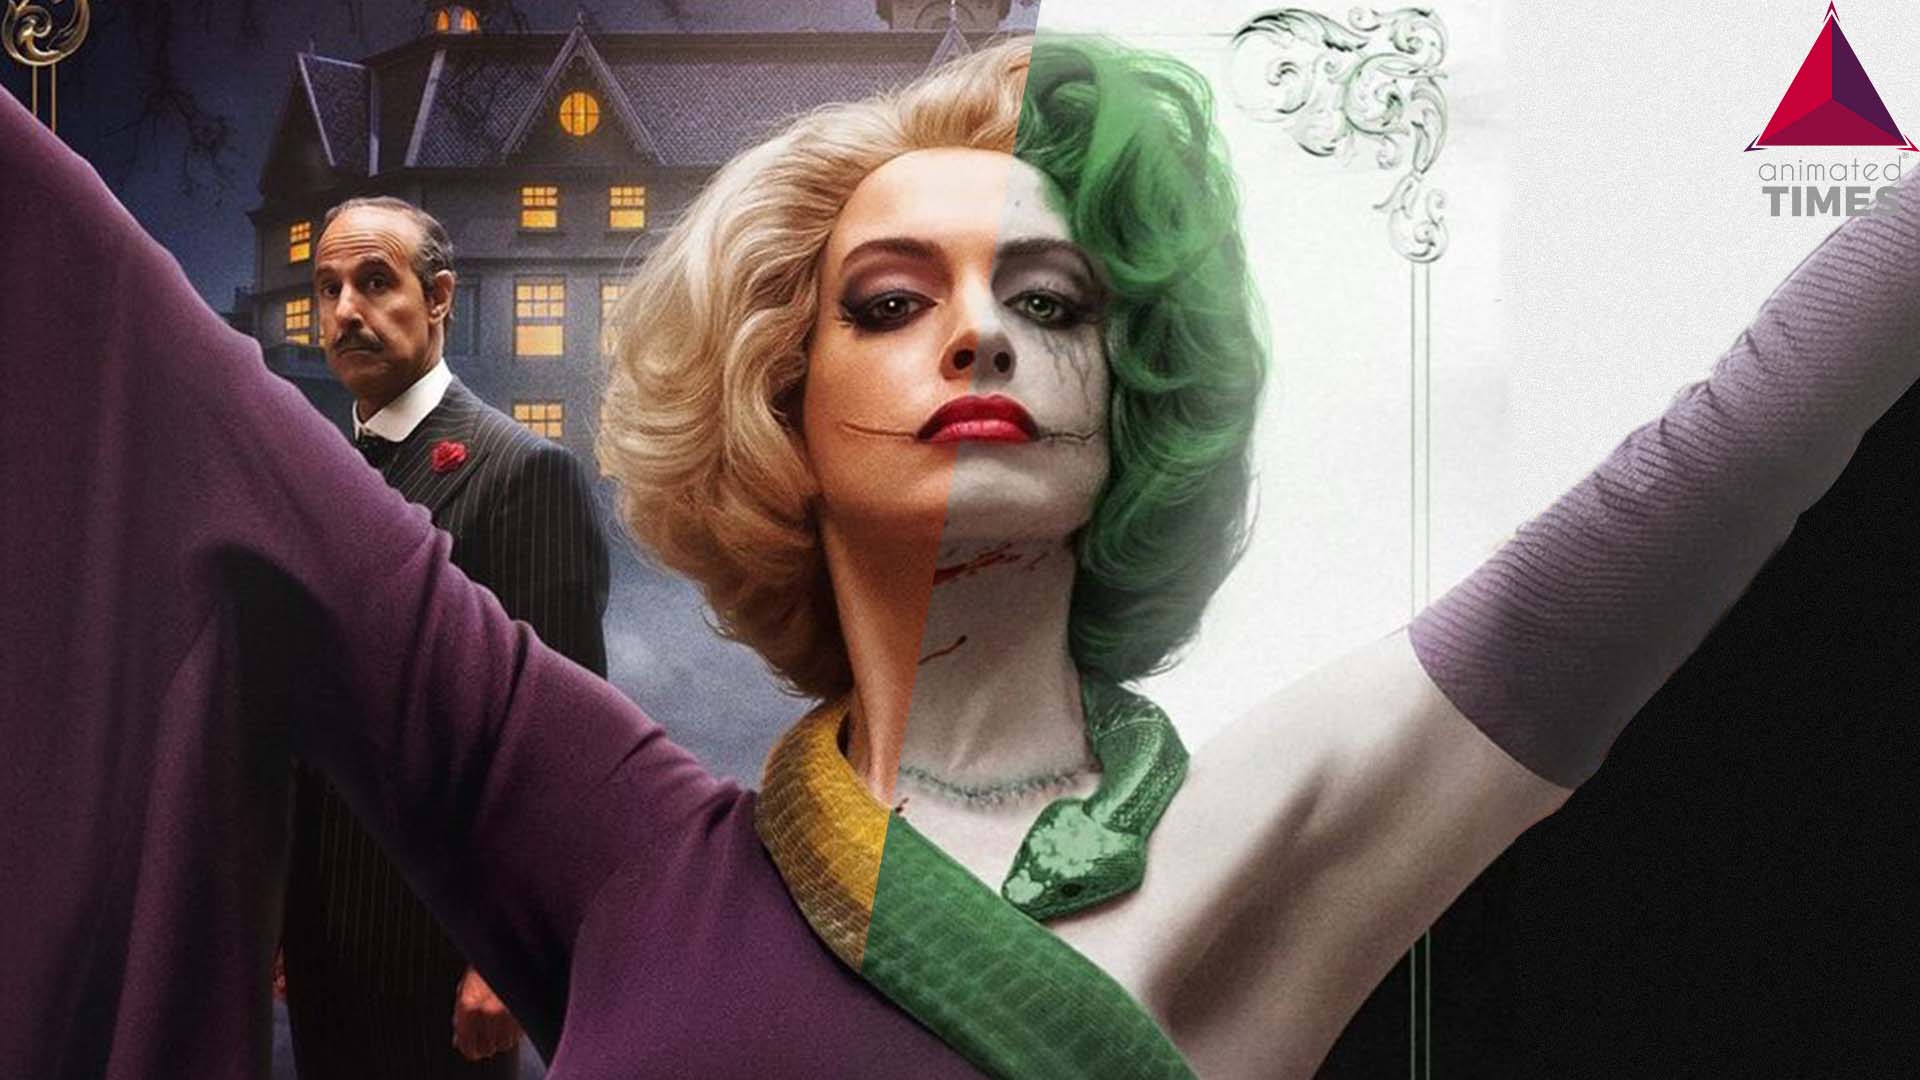 Here’s How Anne Hathaway Could Look Like As DC’s Female Joker In The Flash Movie